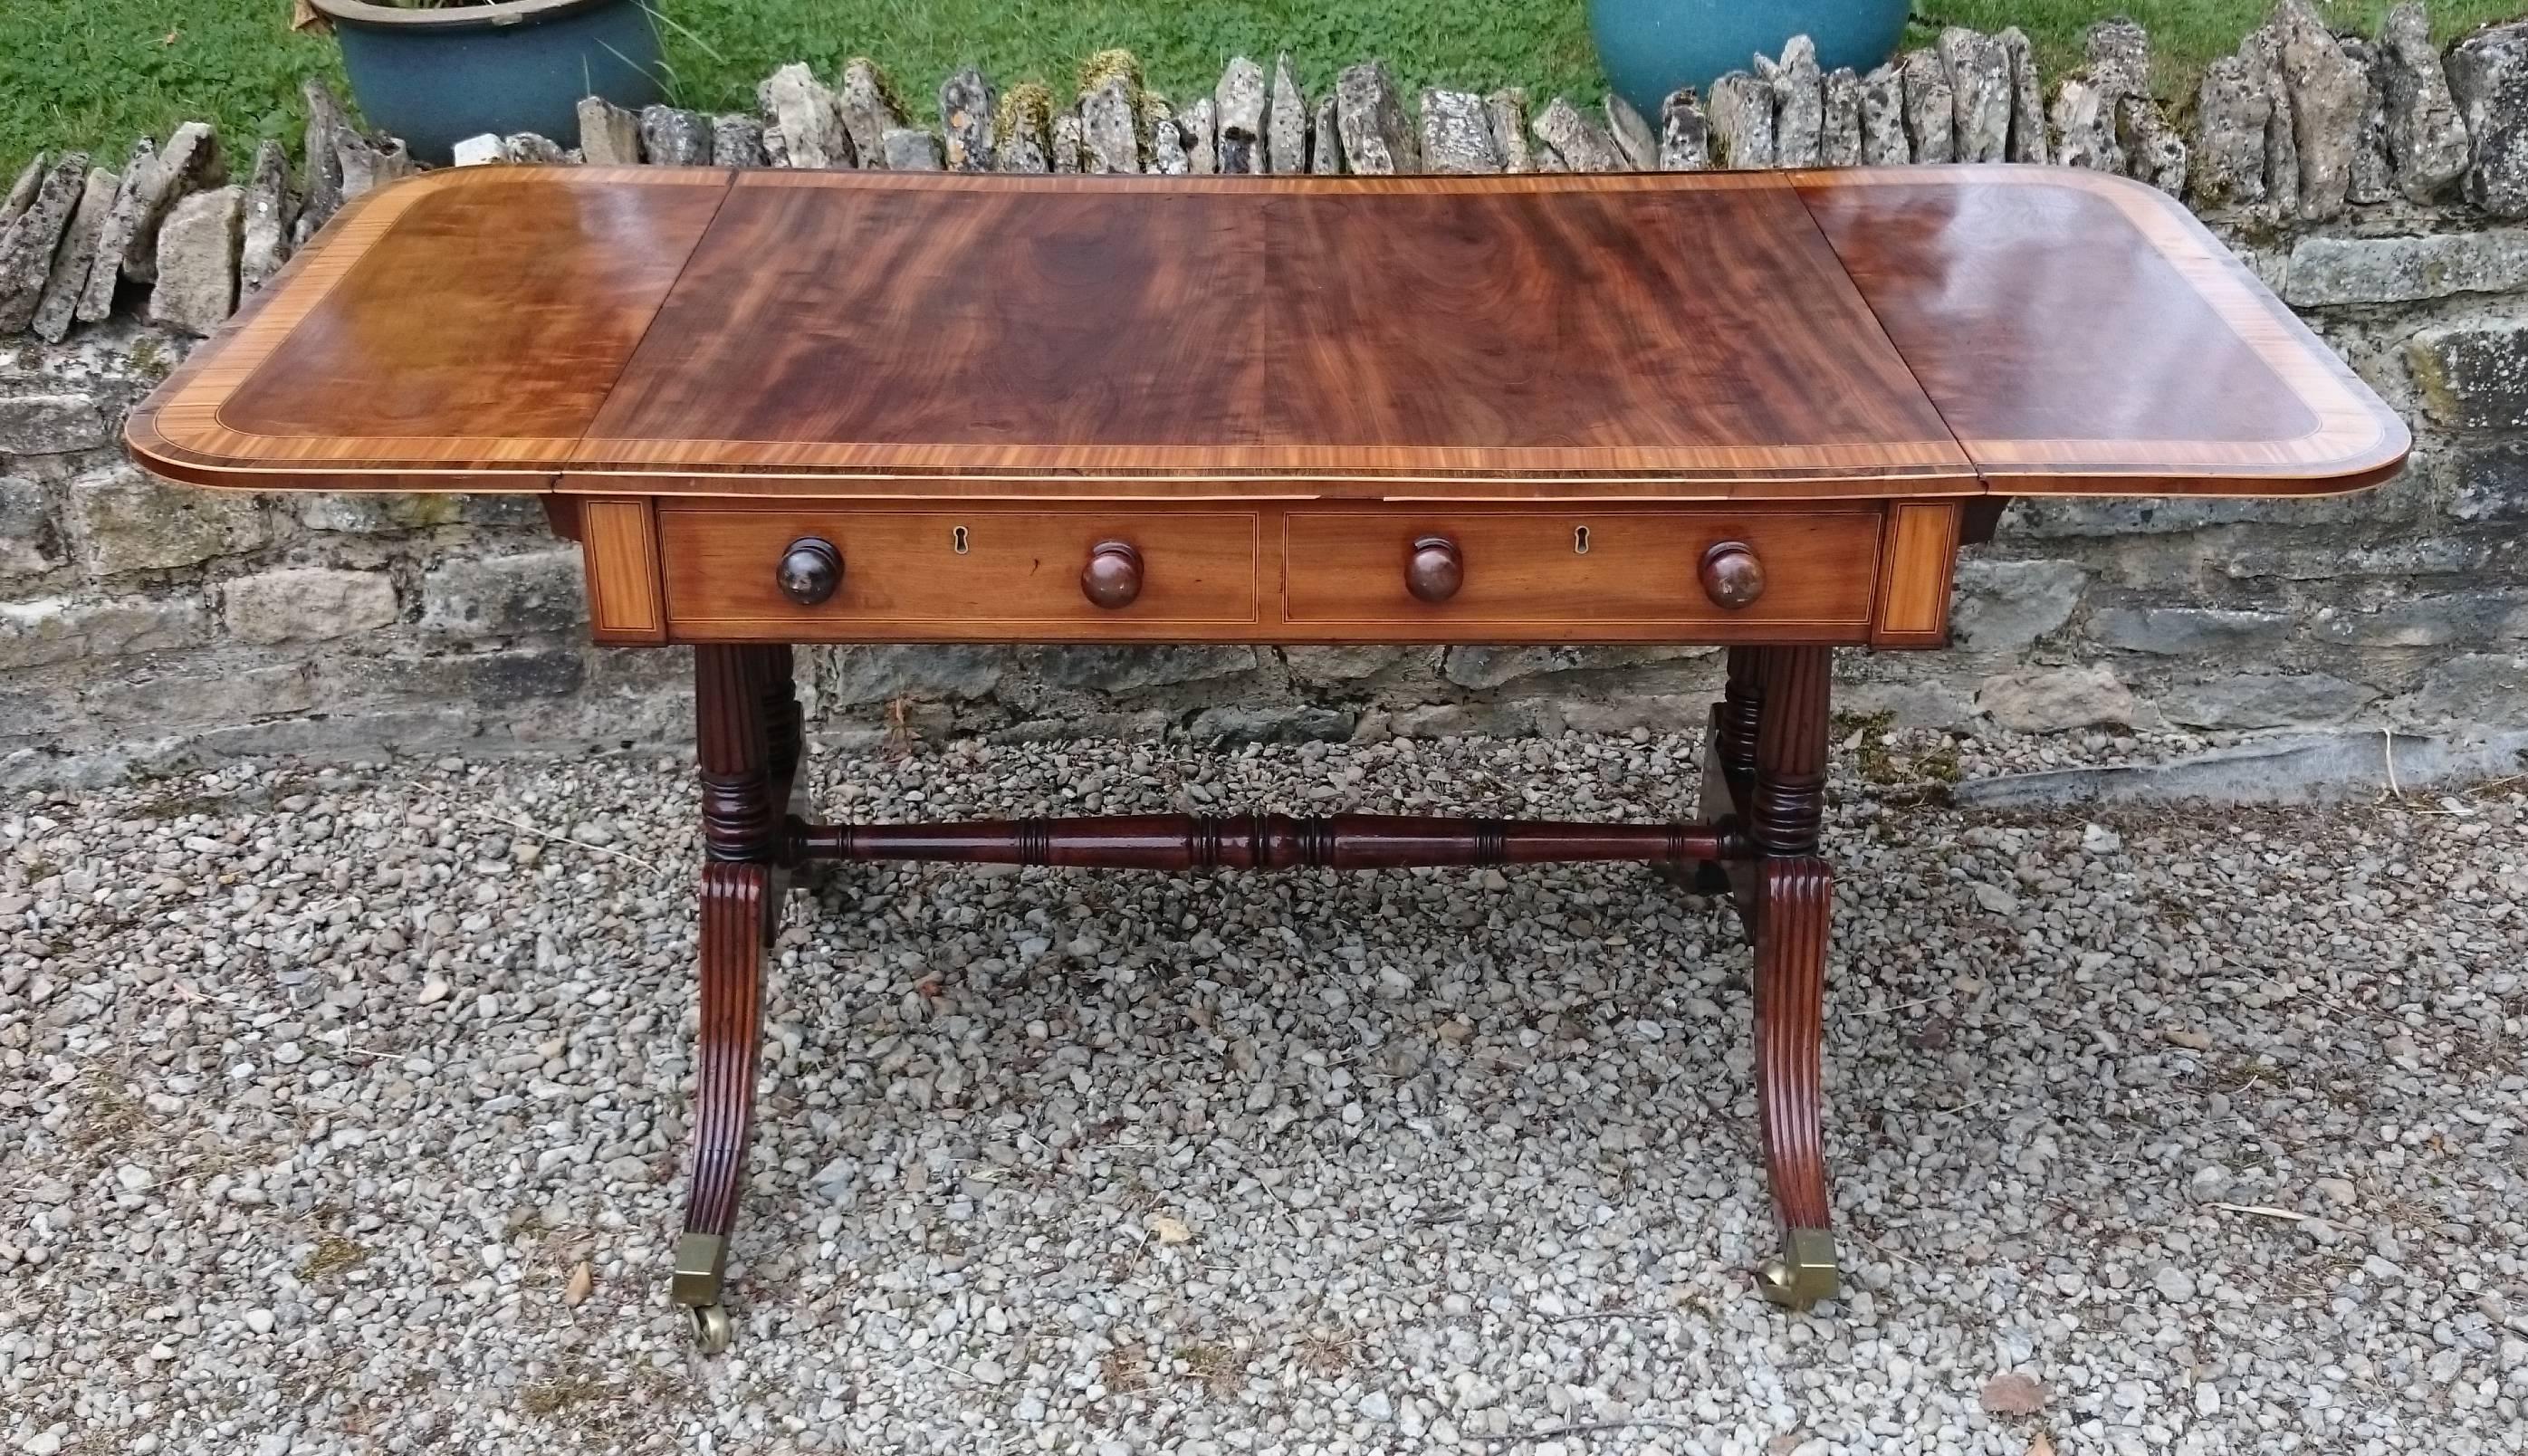 Exceptional quality Regency antique sofa table made of a particularly fine cut of fiddleback mahogany with stringing made of box and ebony woods and with cross banding made from a very dense grained and well figured cut of expensive satin wood.